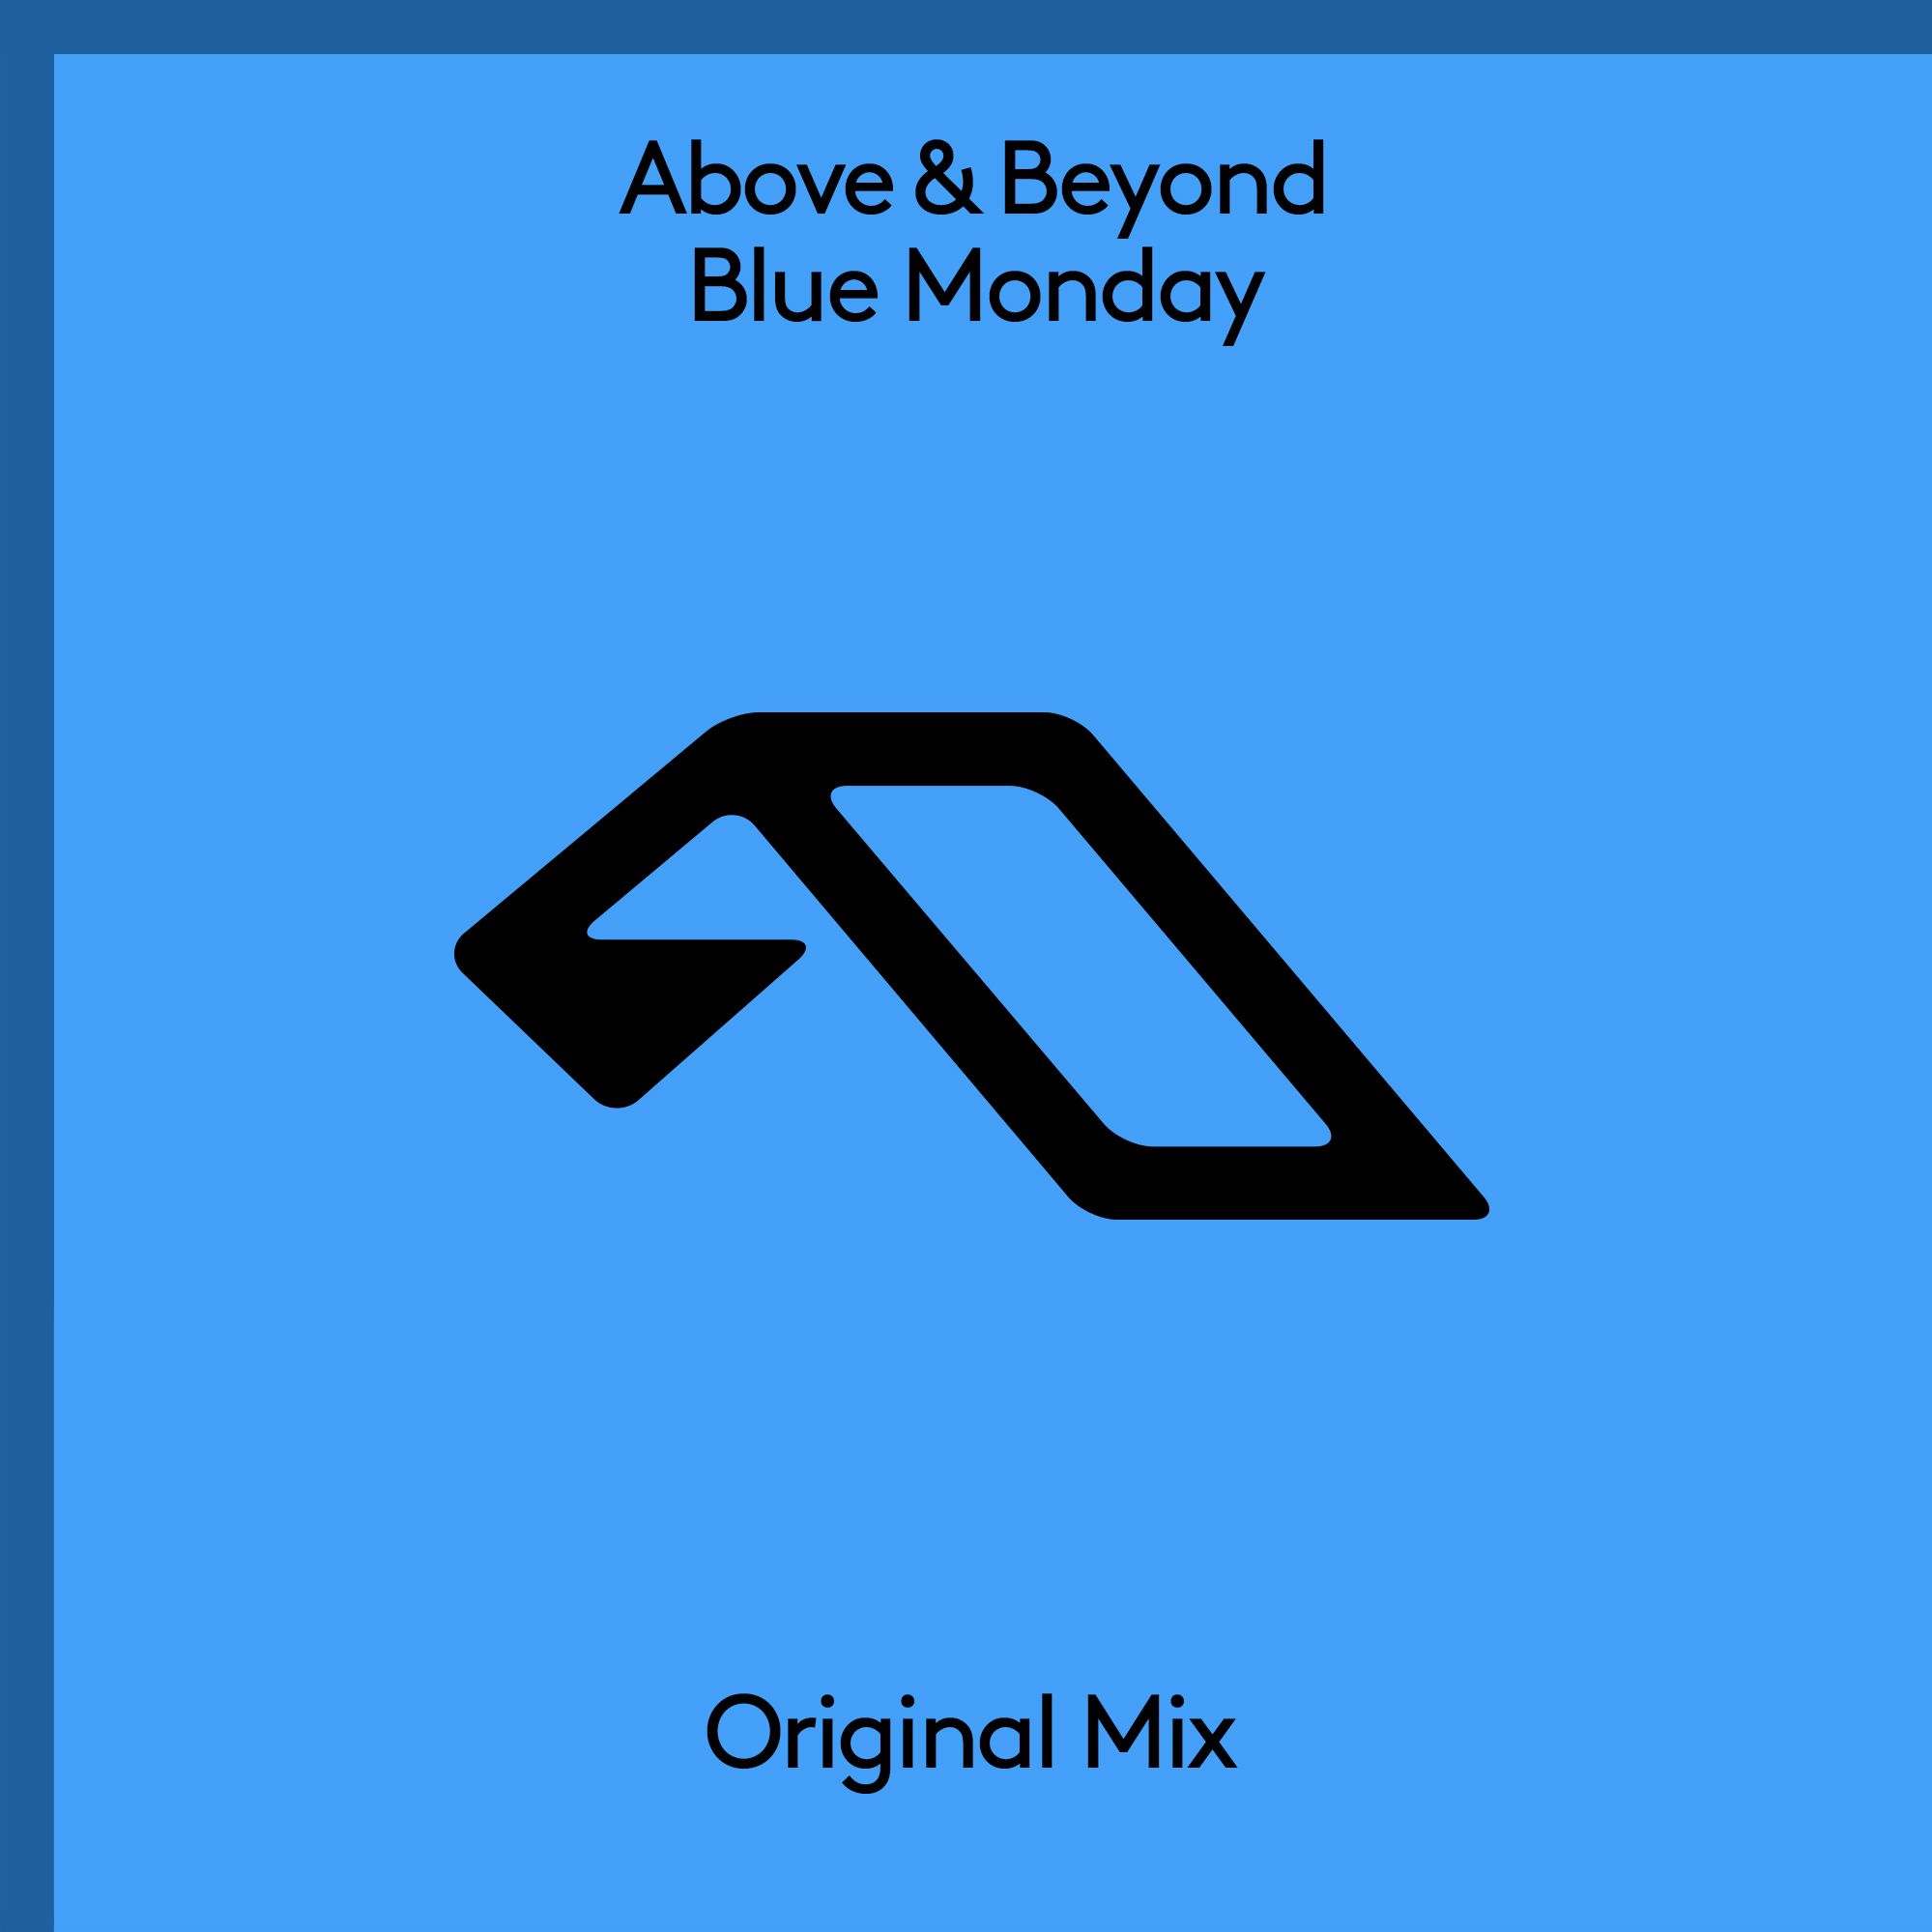 Above & Beyond Officially Release Their Edit of "Blue Monday" EDM